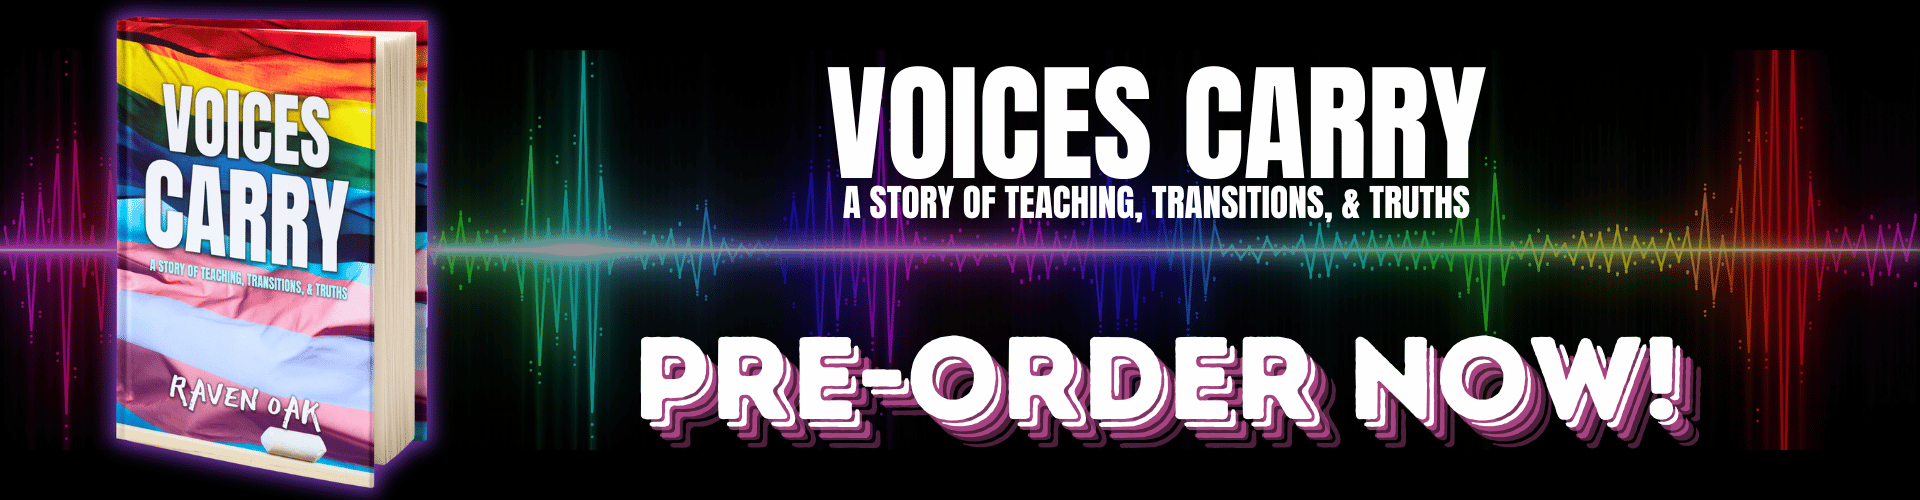 Voices Carry: A Story of Teaching, Transitions, & Truths. Pre-Order Now!